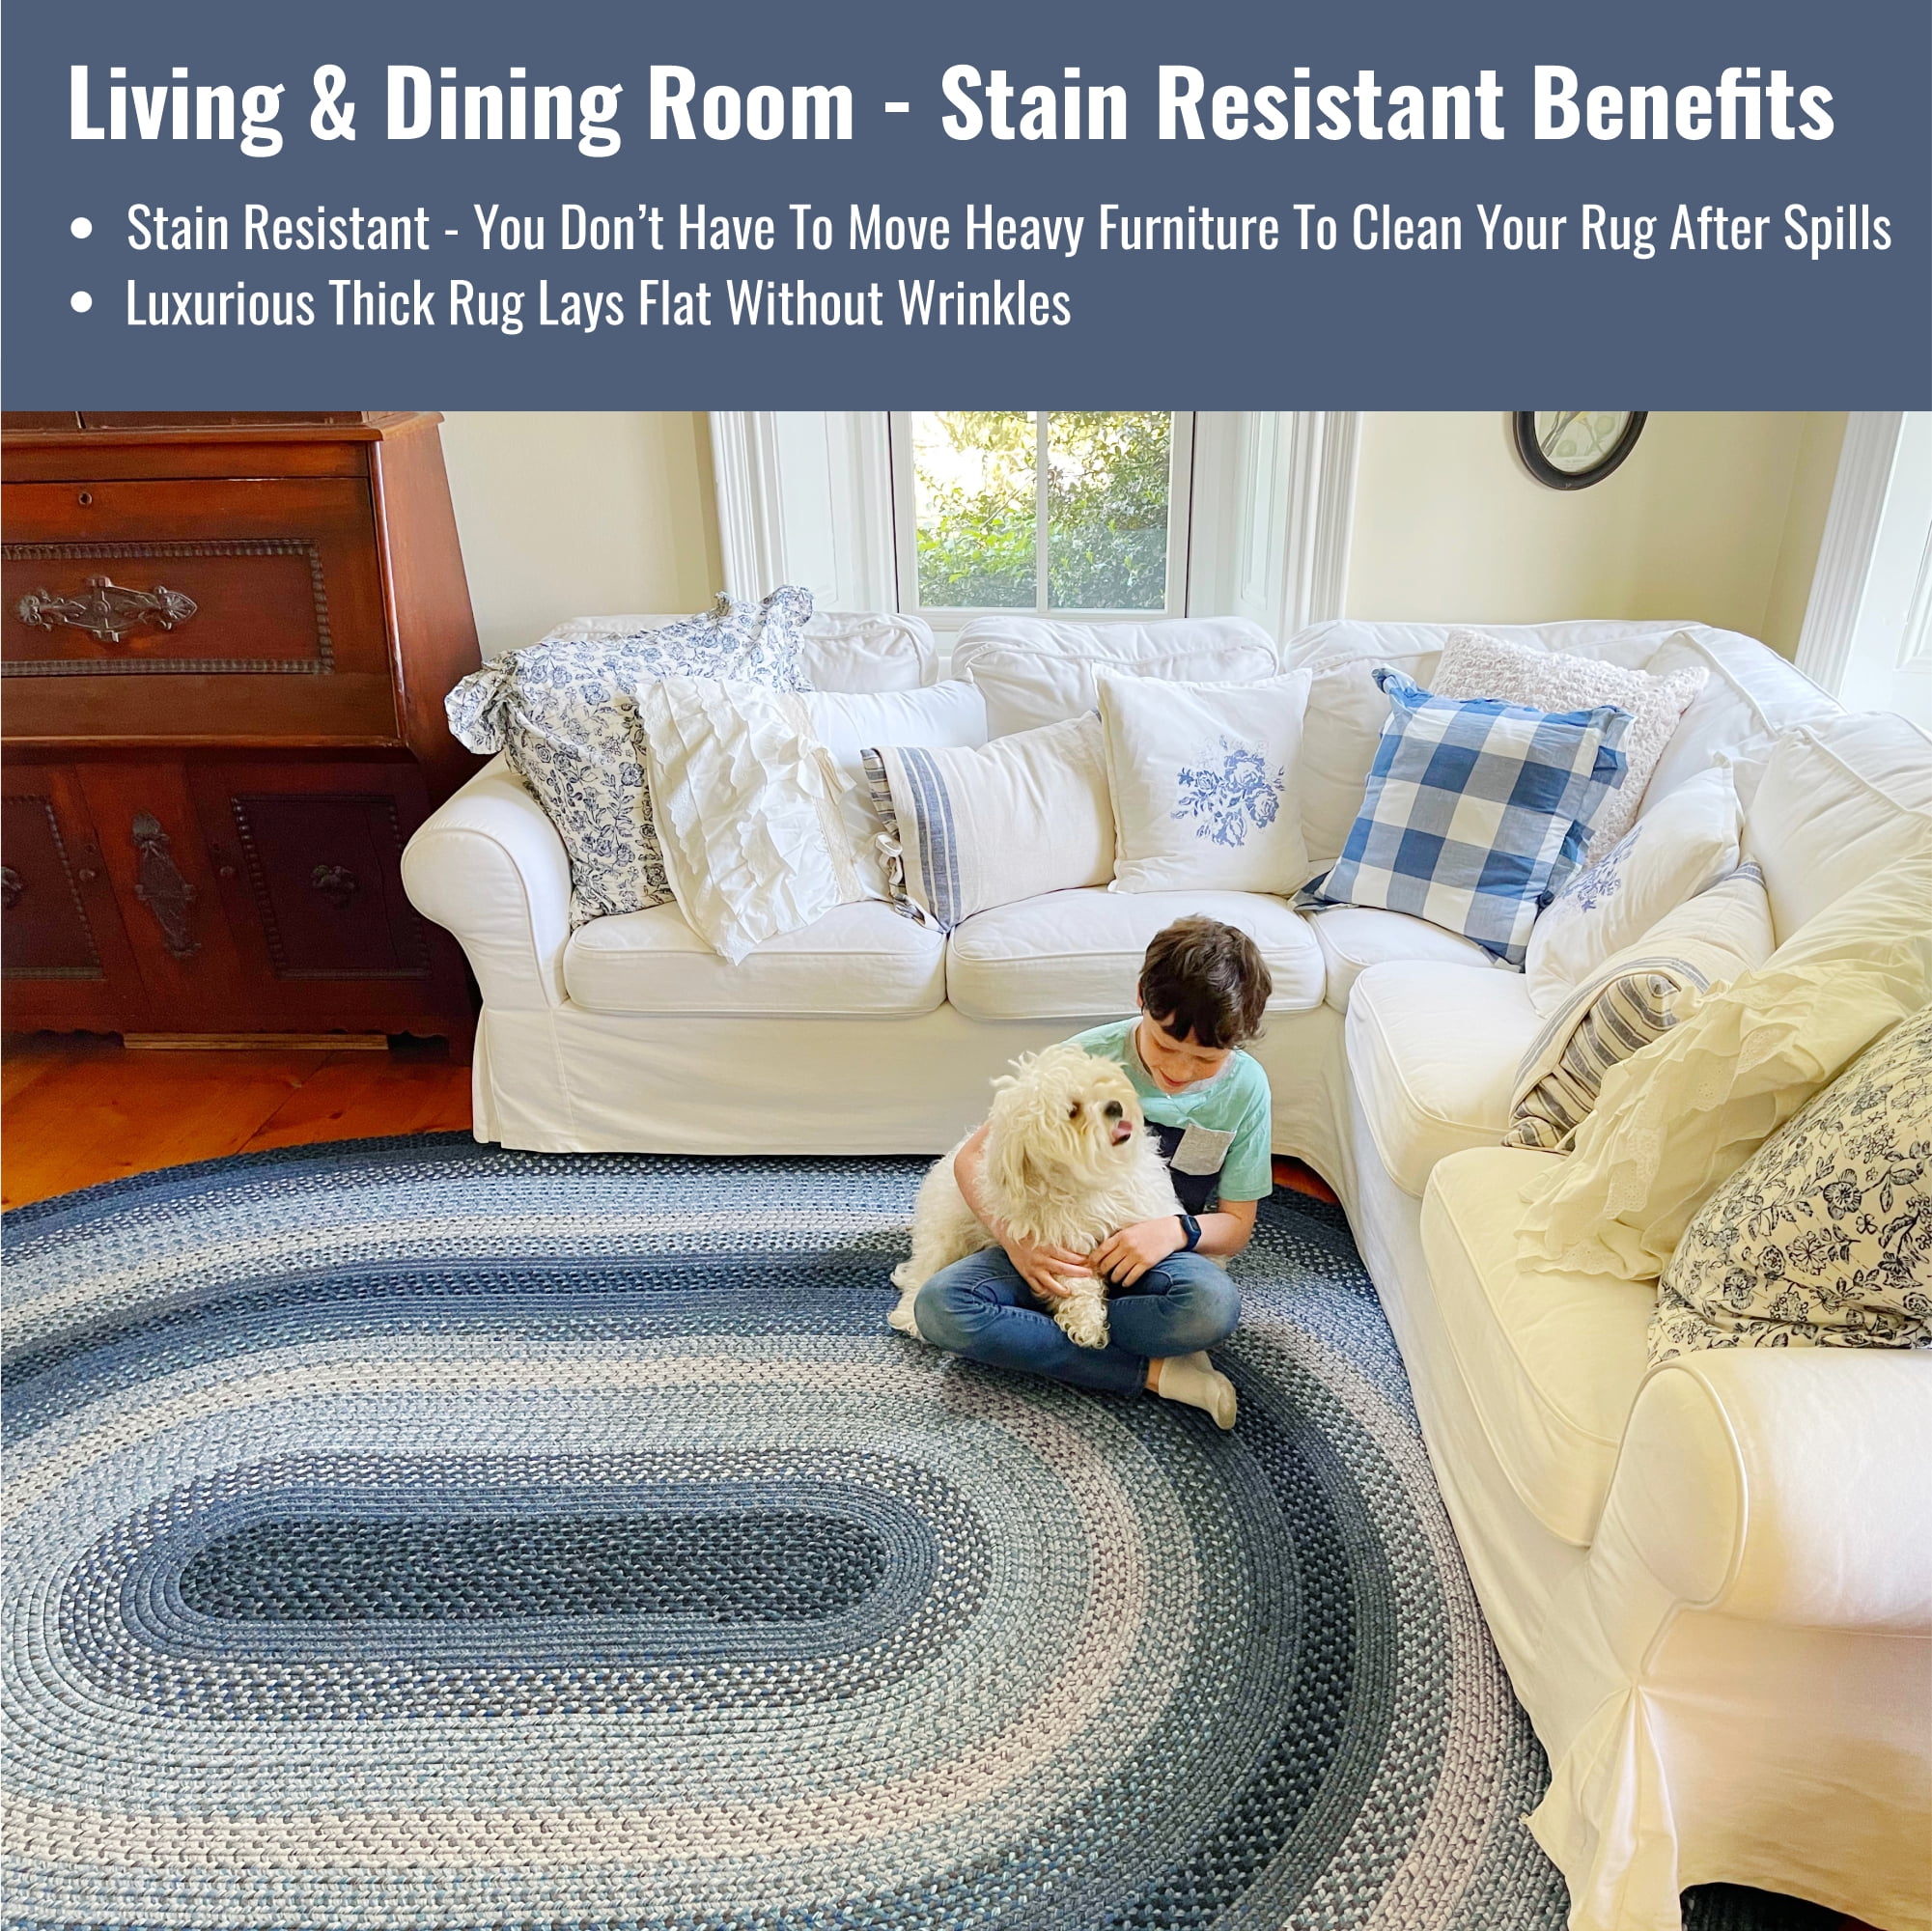 Homespice Demin Blue Oval Braided Rugs 16x24 Perfect Mats for Any Kitchen,  Bathroom or Entryway